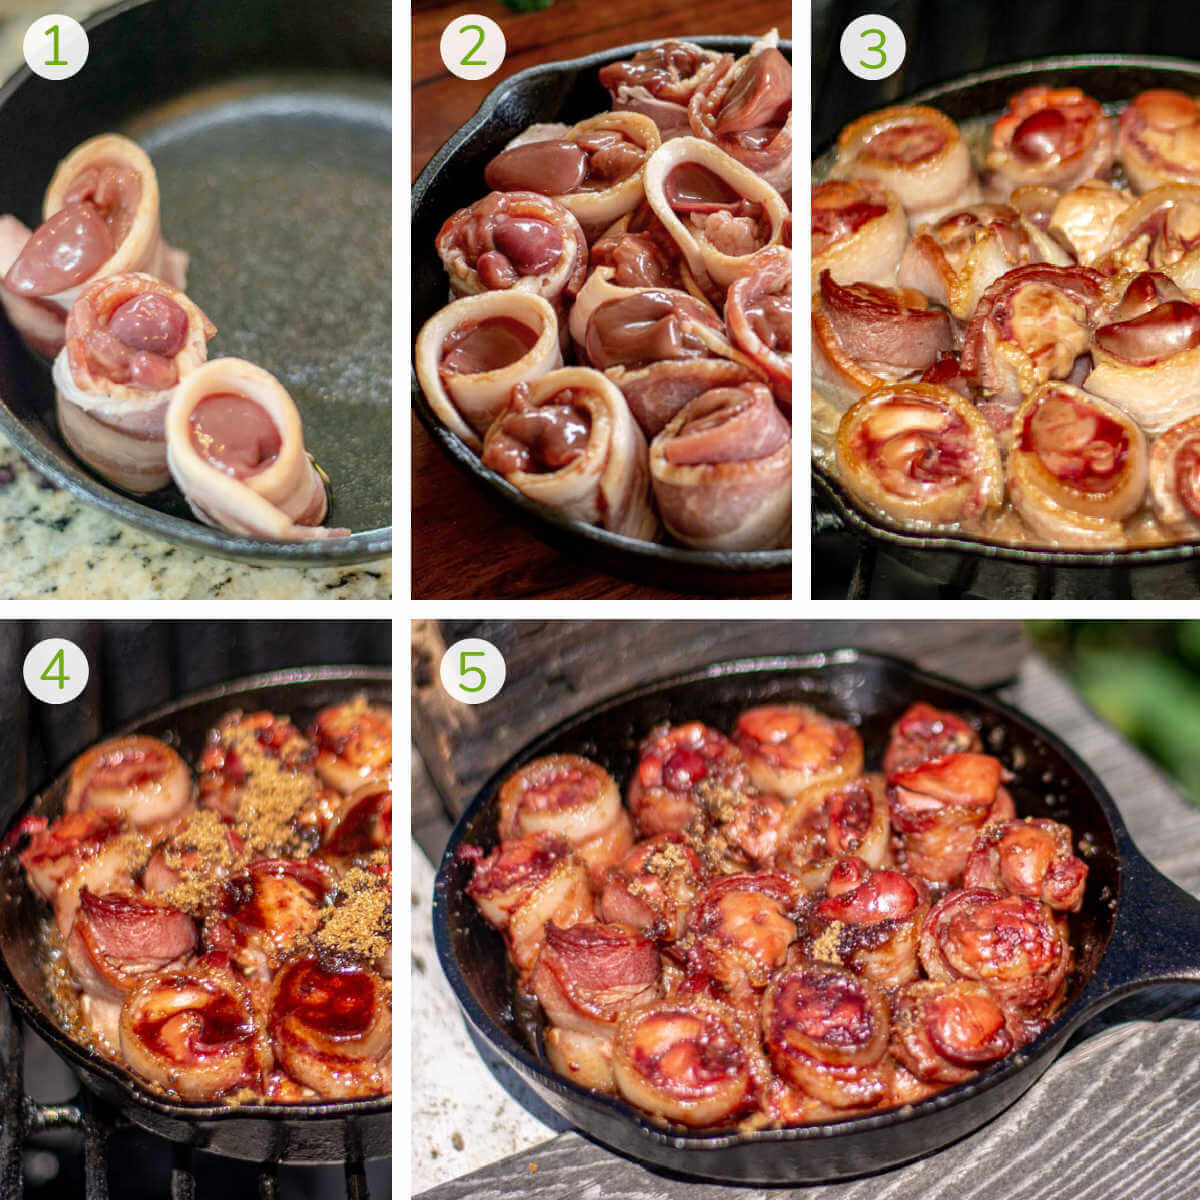 process photos showing wrapping the livers, adding them to a skillet, grilling, topping with brown sugar and serving.